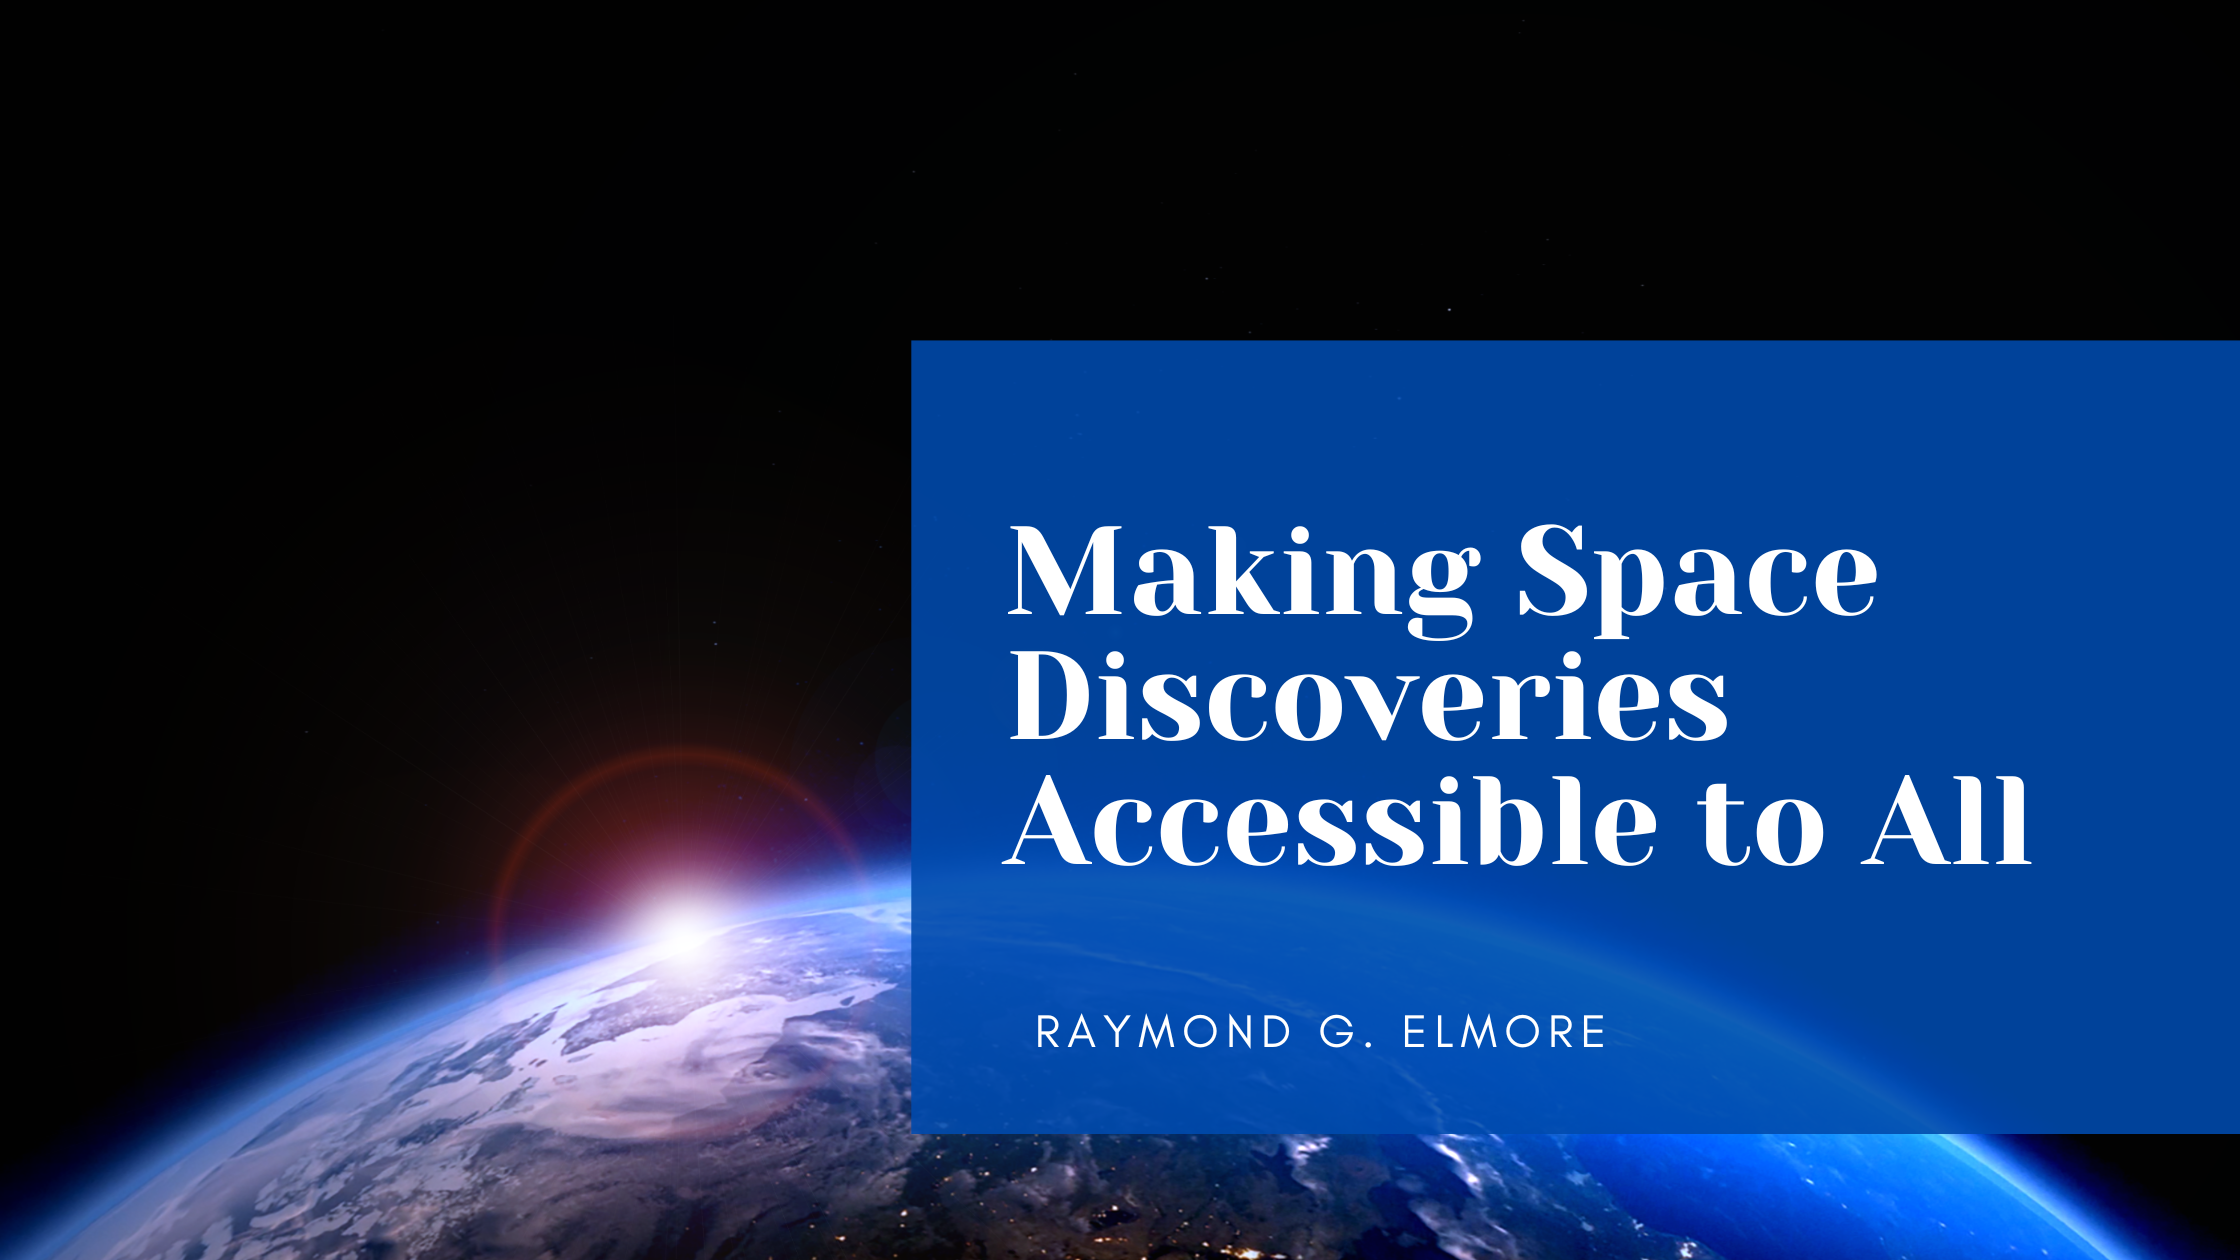 Making Space Discoveries Accessible to All